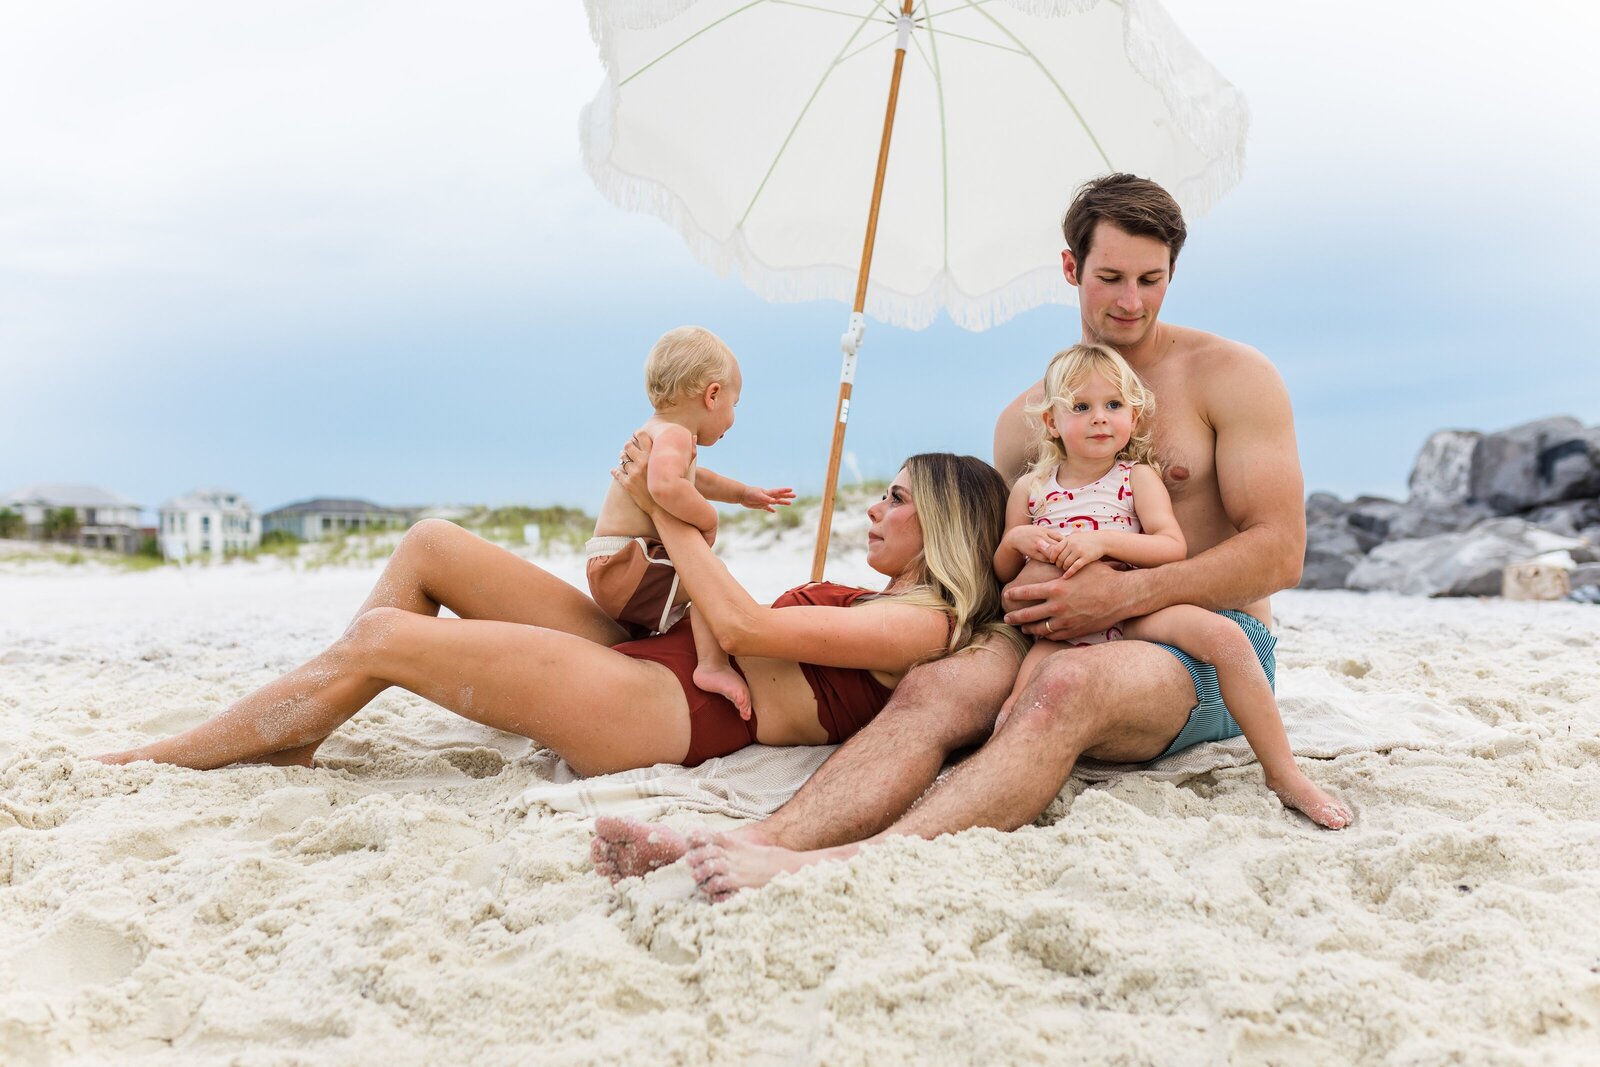 Pensacola Beach vacation family photo session . Family playing in the water.